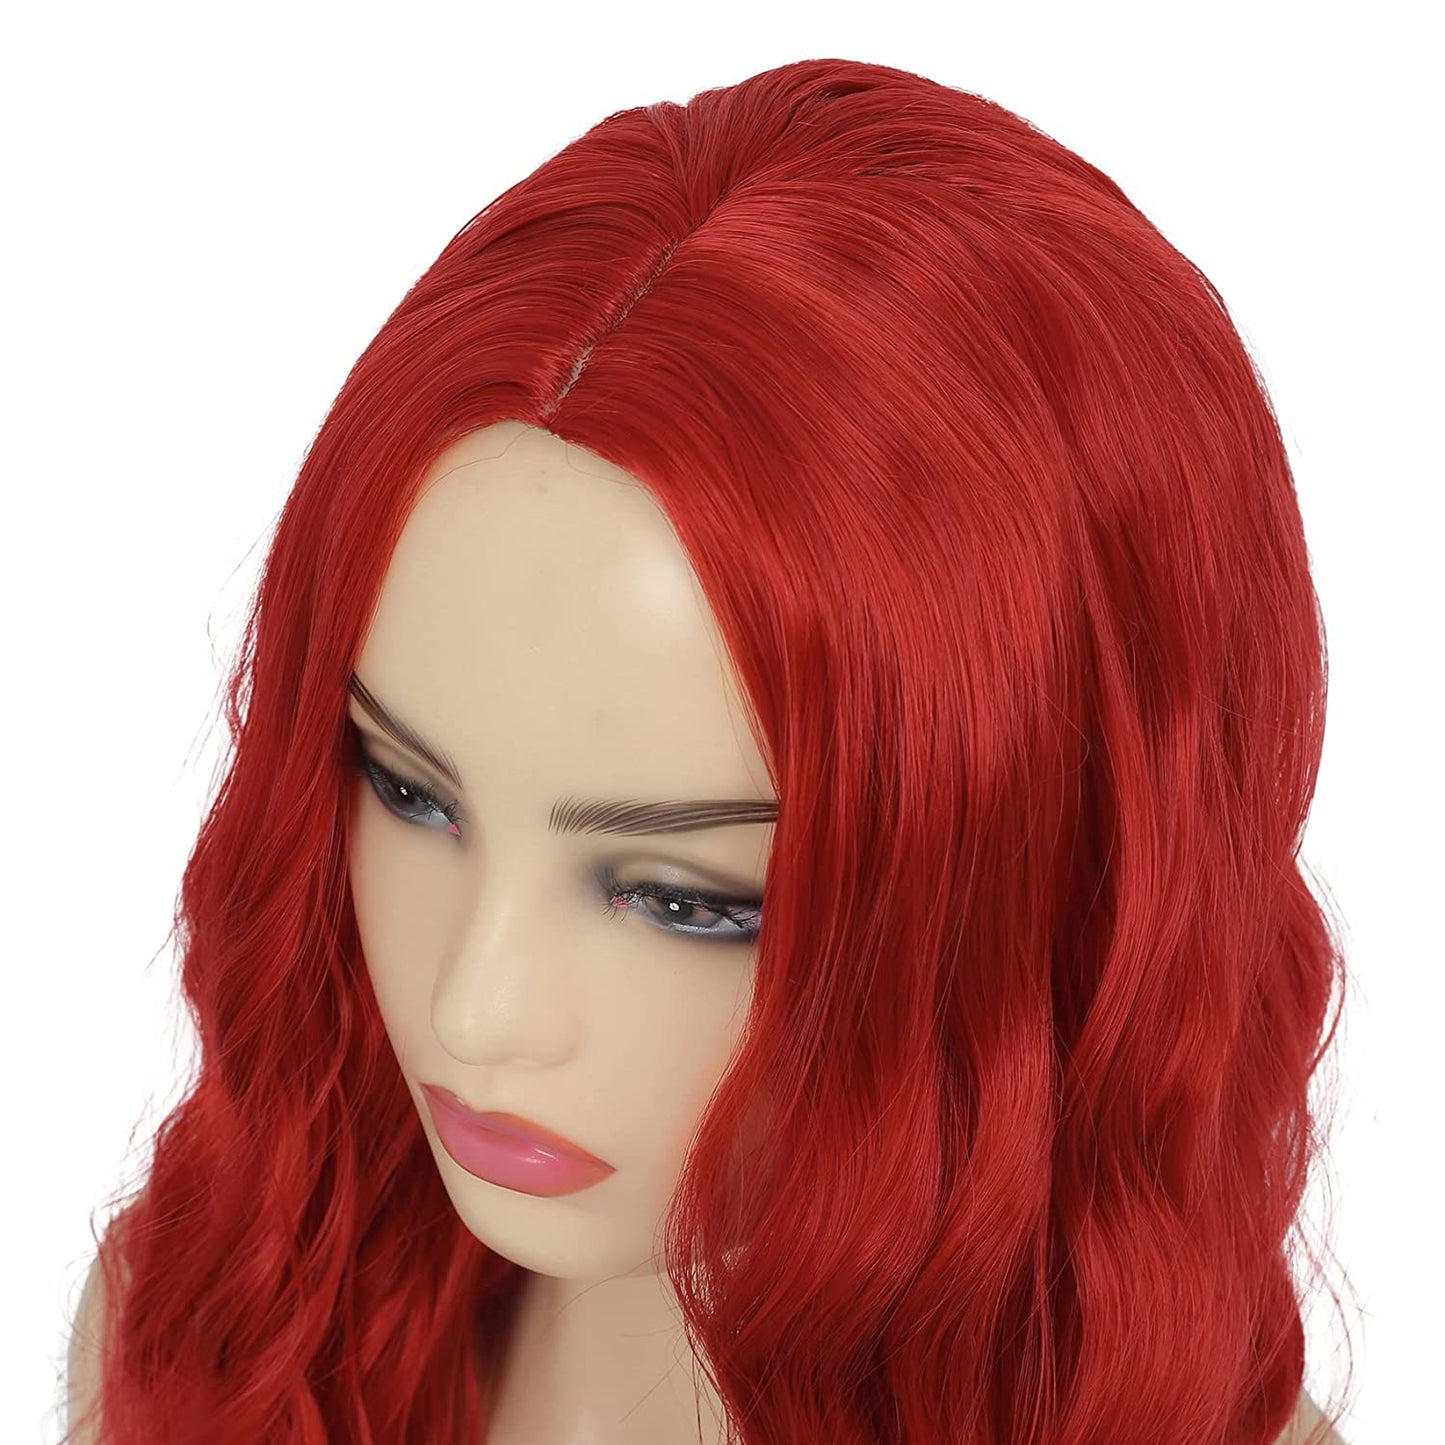 Long Curly Middle Part Red Hair Wig